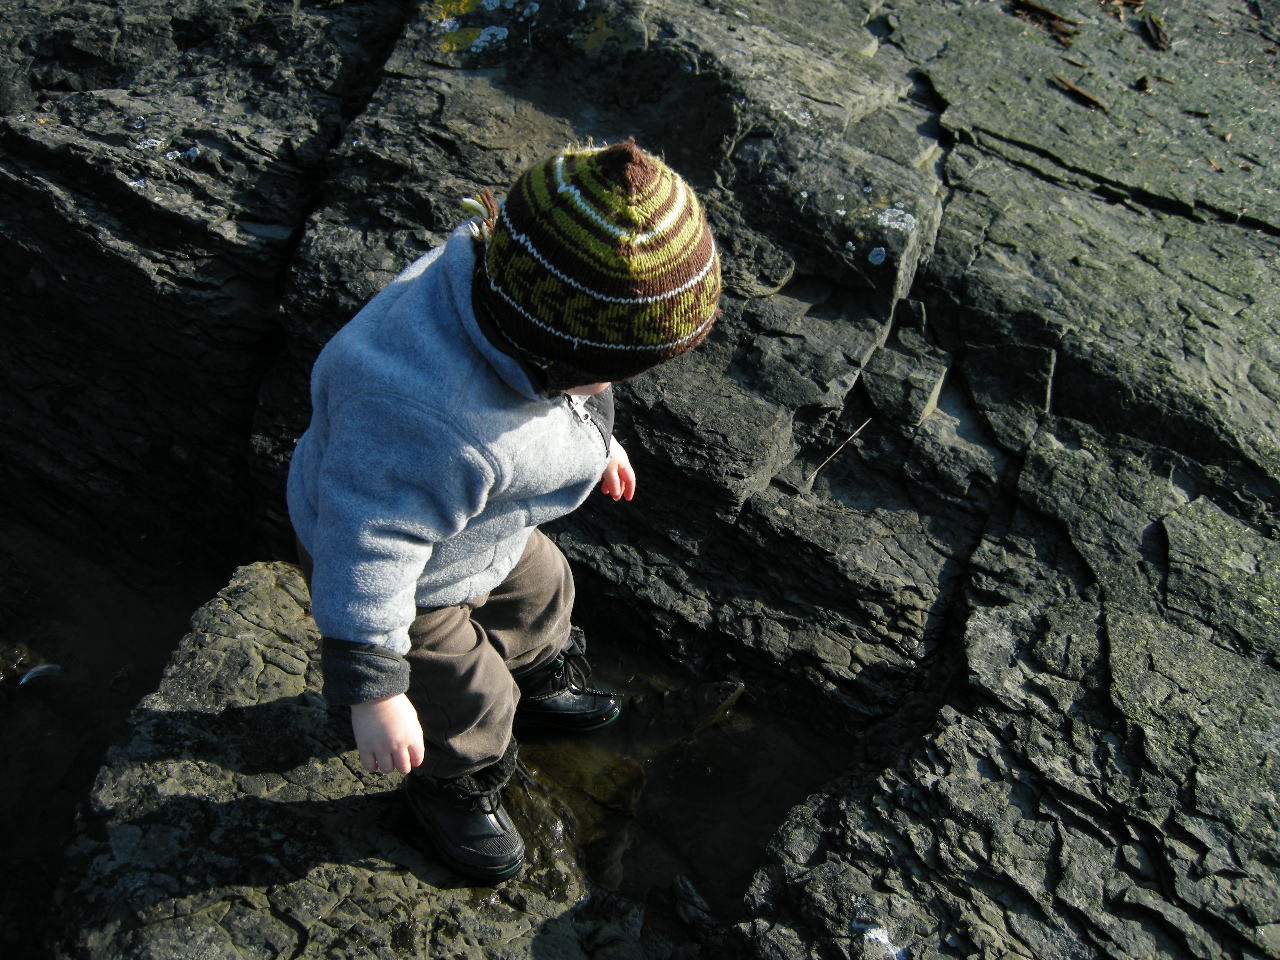 [Investigating+Rocks+and+puddle.JPG]